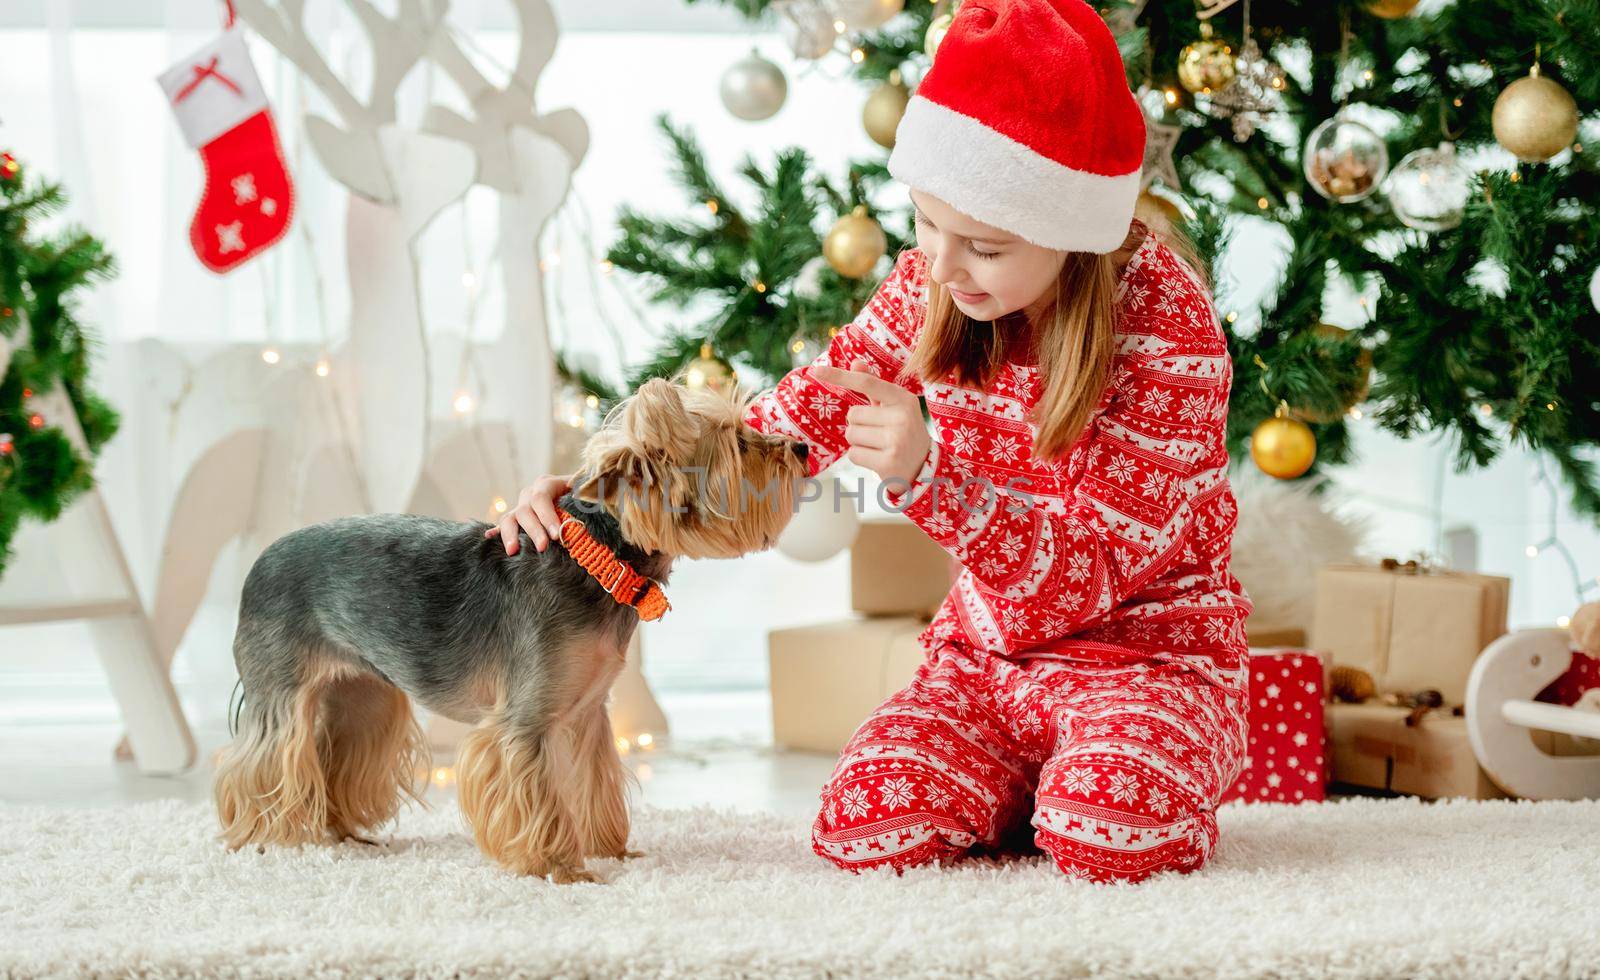 Child girl sitting with dog near Christmas tree. Kid wearing Santa hat celebrating New Year with doggy pet terrier